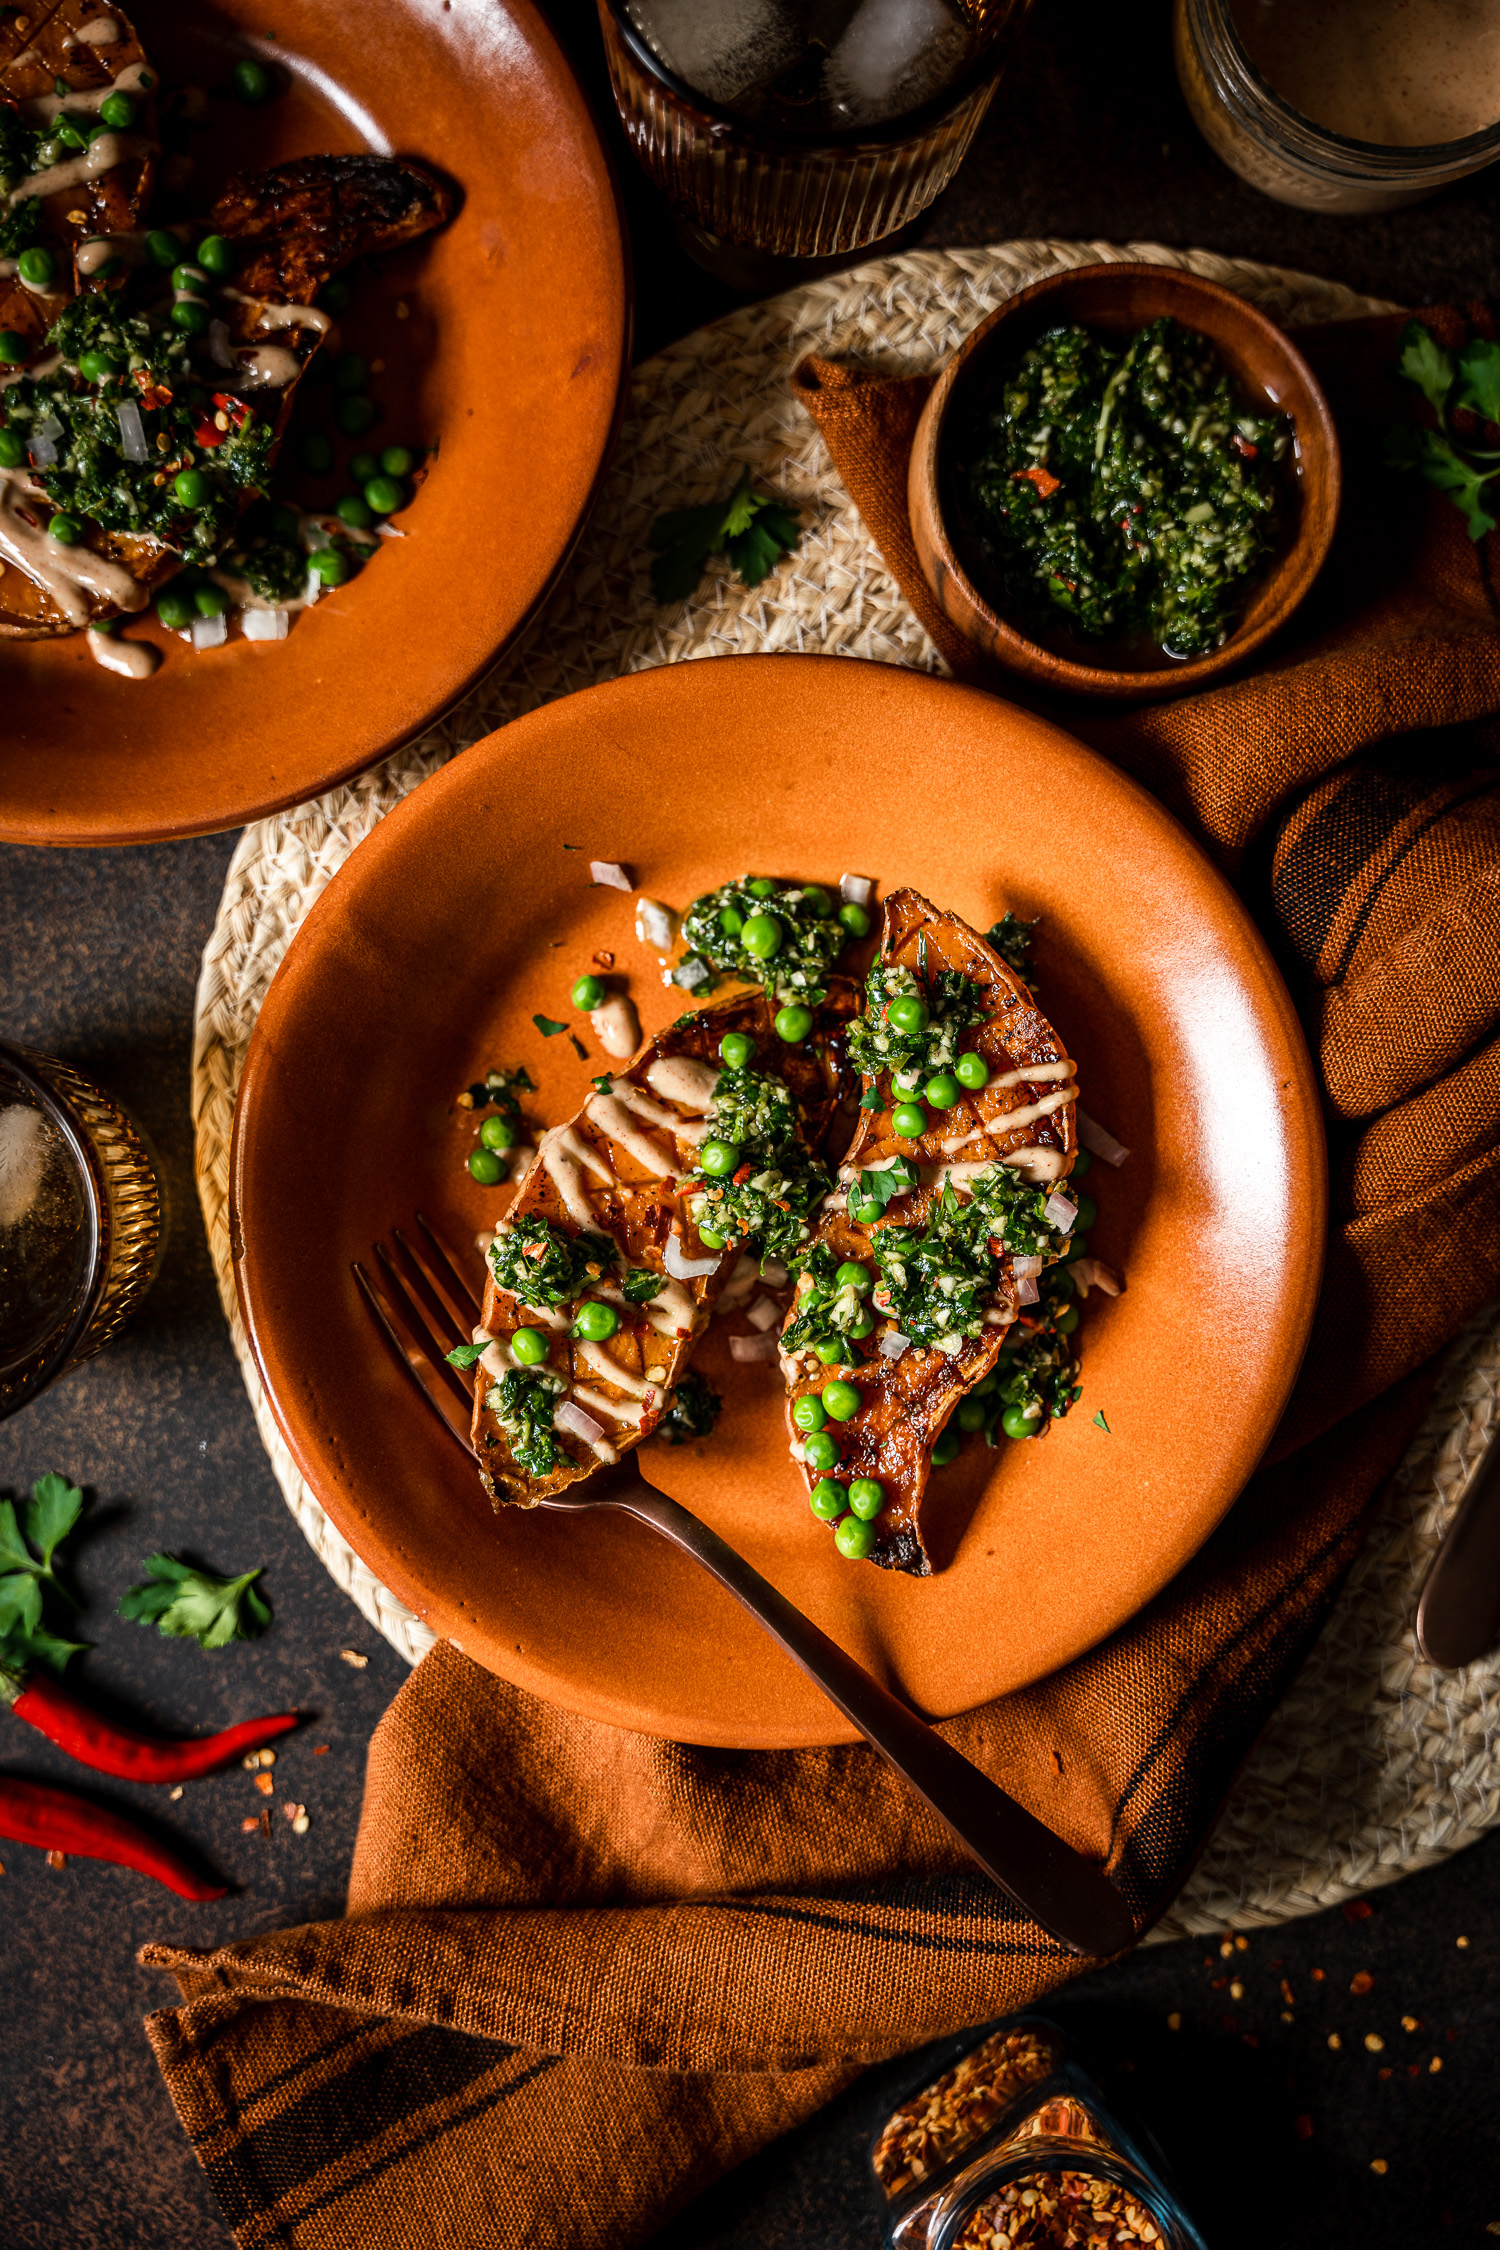 Roasted Sweet Potato Boats with Spicy Chimichurri and Smoky Crema overhead together with chimichurri in a bowl